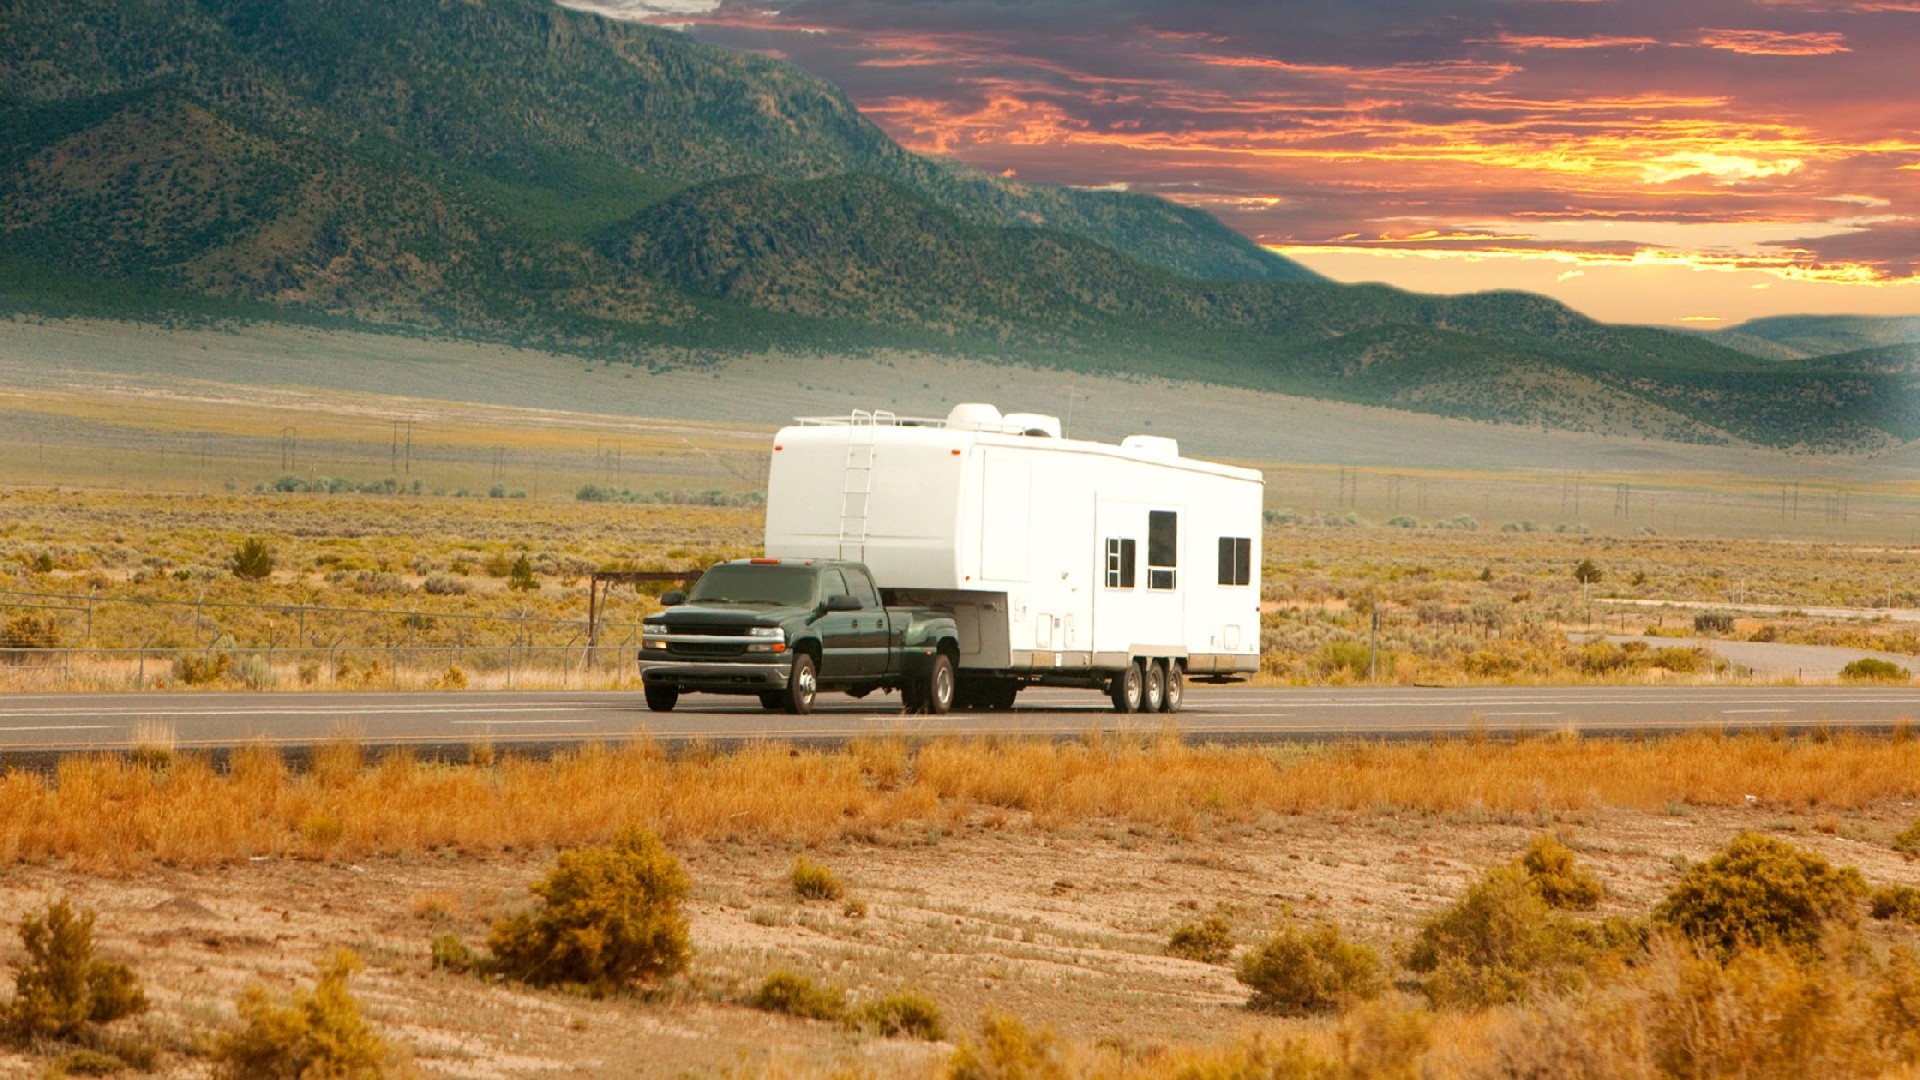 Travel Trailer Depreciation: 13 Factors Impacting Value and Strategies to Preserve Your Investment